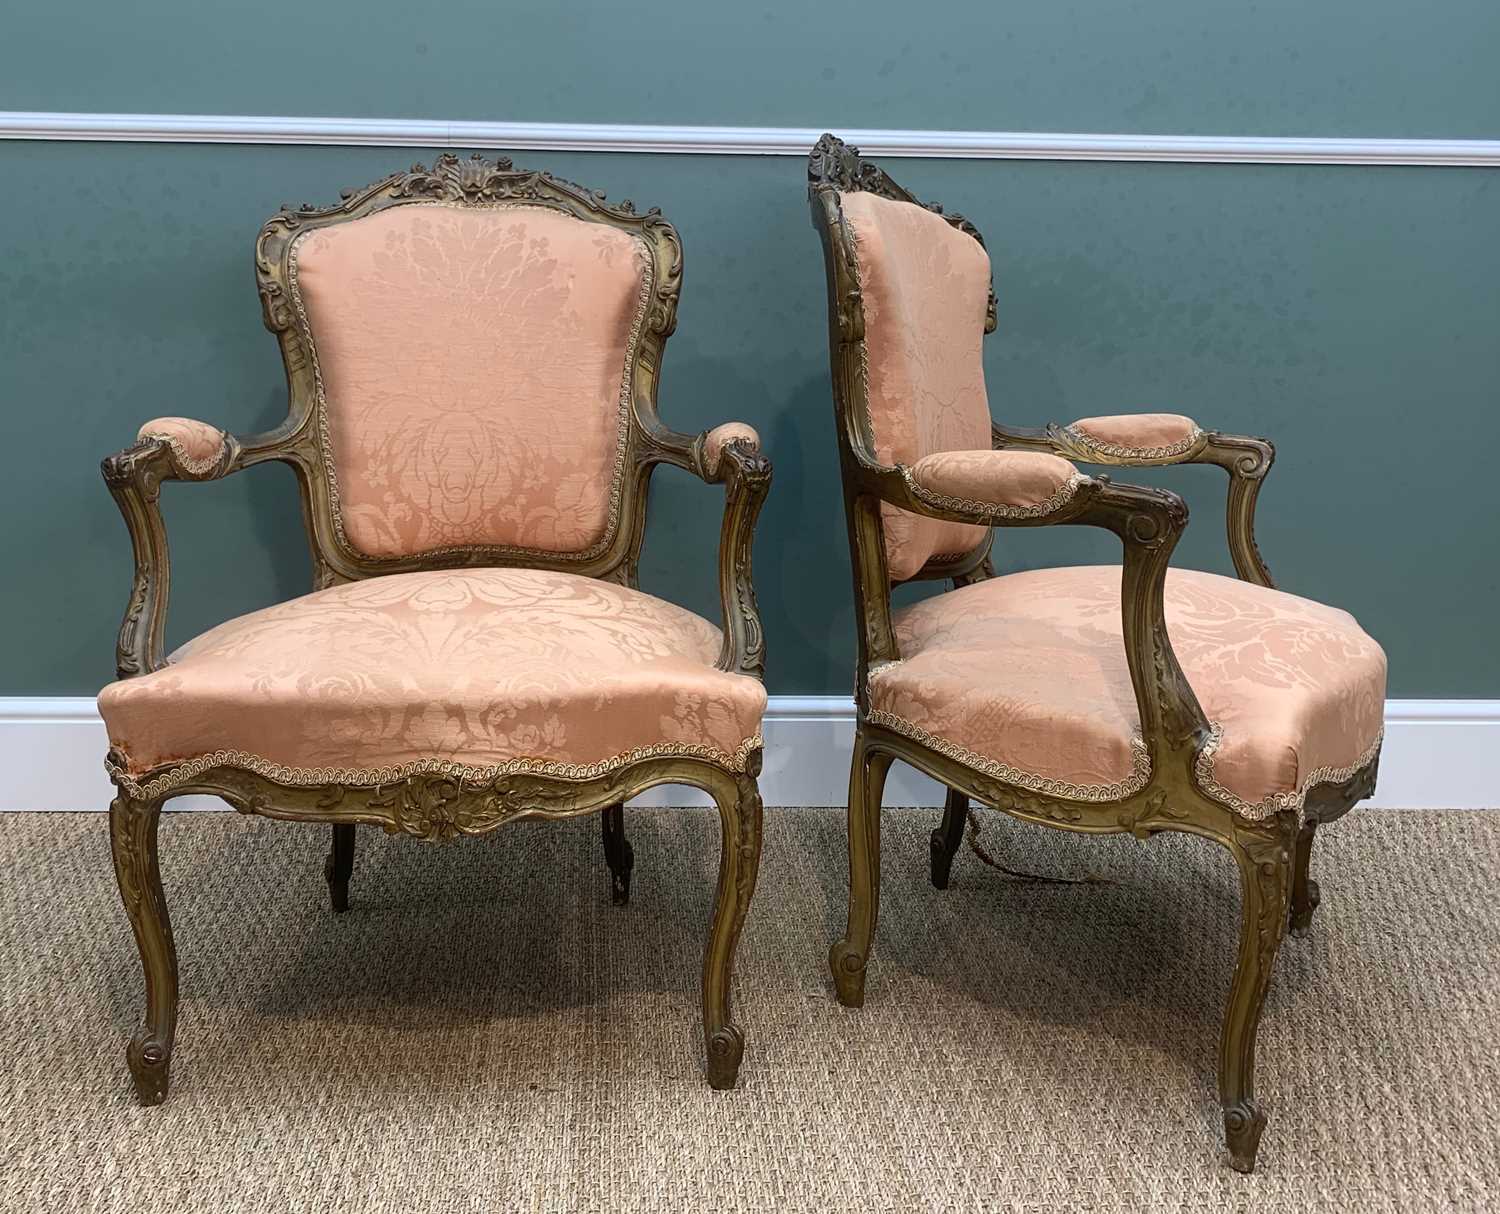 LOUIS XV-STYLE GILTWOOD SALON SUITE, comprising canape and pair of fauteuils, apricot damask - Image 6 of 7